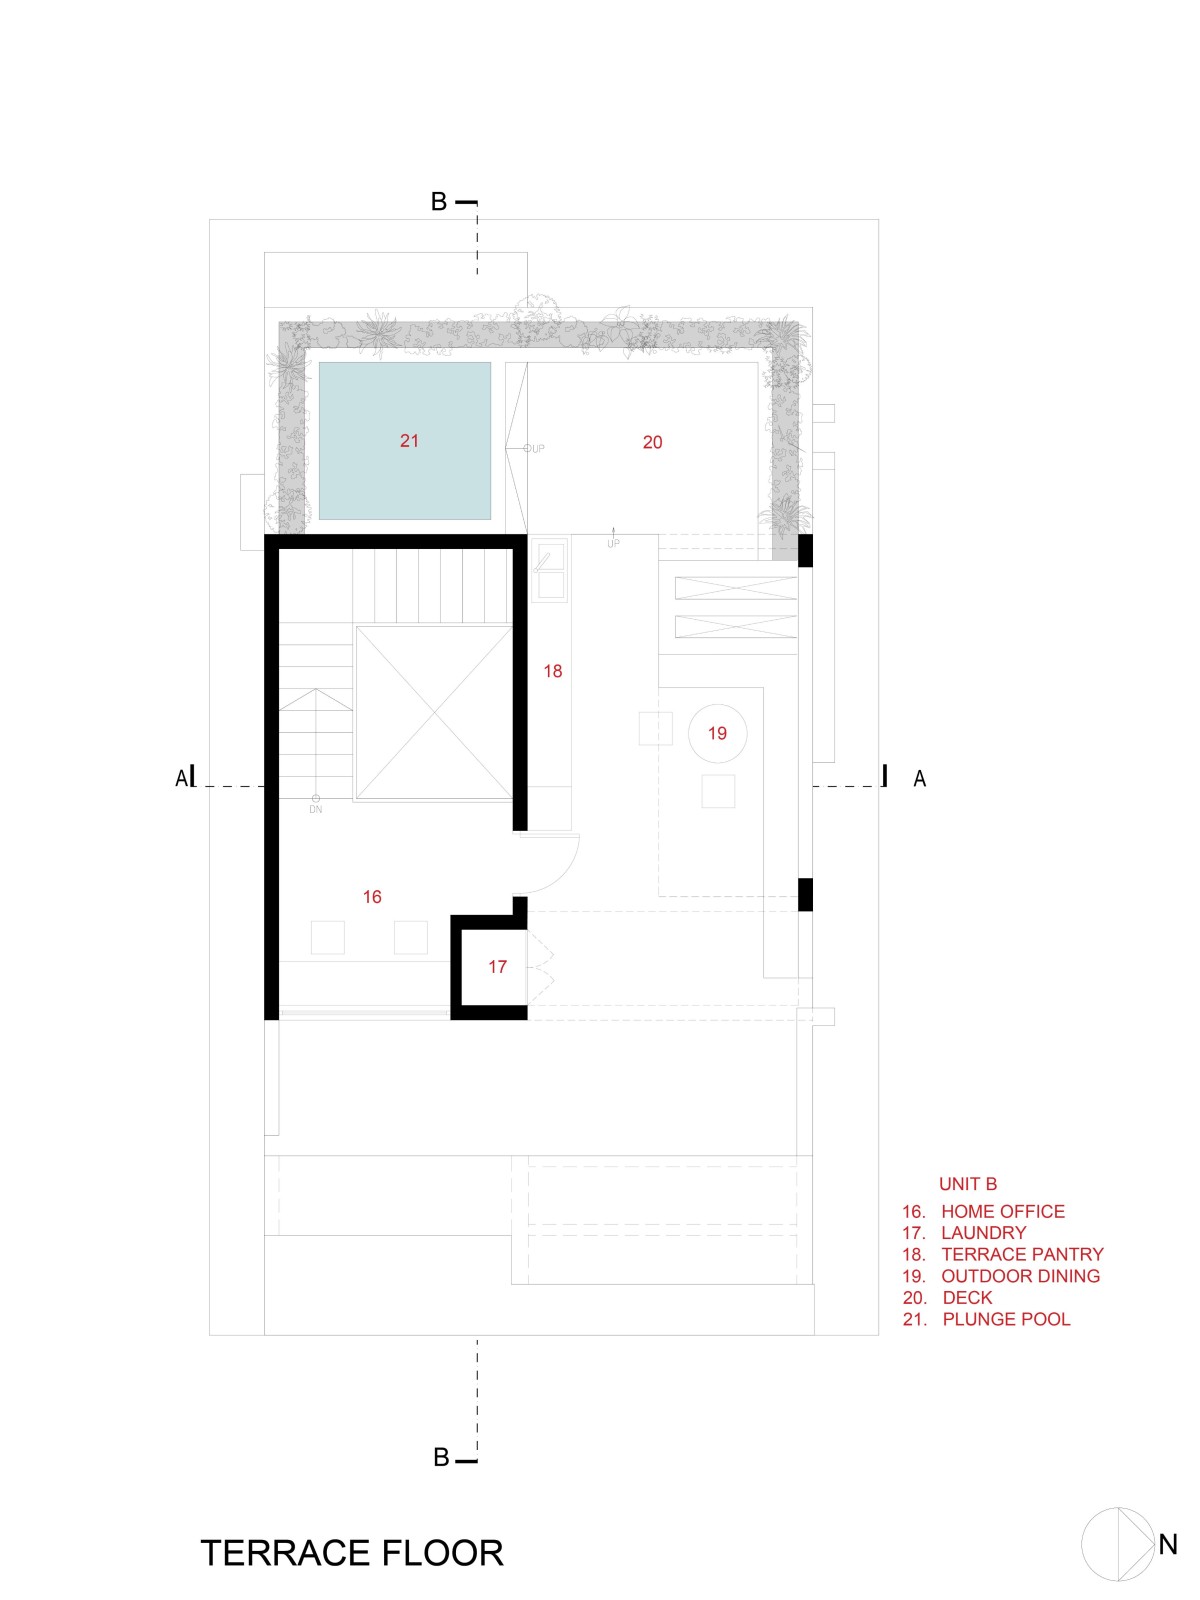 Terrace floor plan of Lucid House by ma+rs